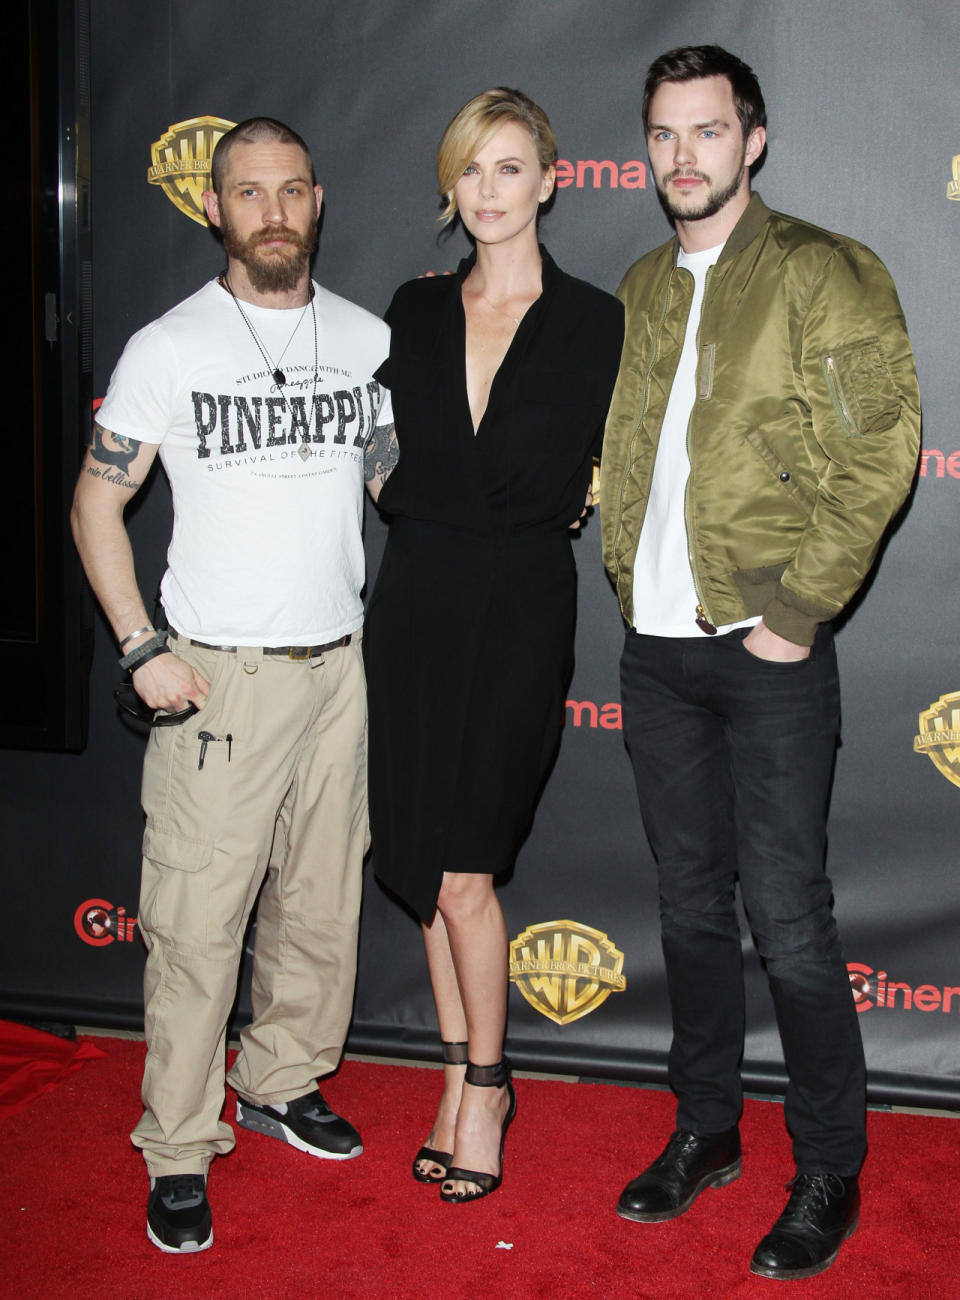 The co-stars in the upcoming remake of “Mad Max” seemed to have gotten different dress codes on their invitations. Tom Hardy’s unkempt beard, ‘90s cargo pants, and “pineapple” T-shirt ensemble appeared more appropriate for, well, no where while Nicholas Hoult, in dark jeans and an army green satin bomber jacket was casual cool. Charlize Theron, on the other hand, was totally glam in a black wrap dress from Alexandre Vauthier.